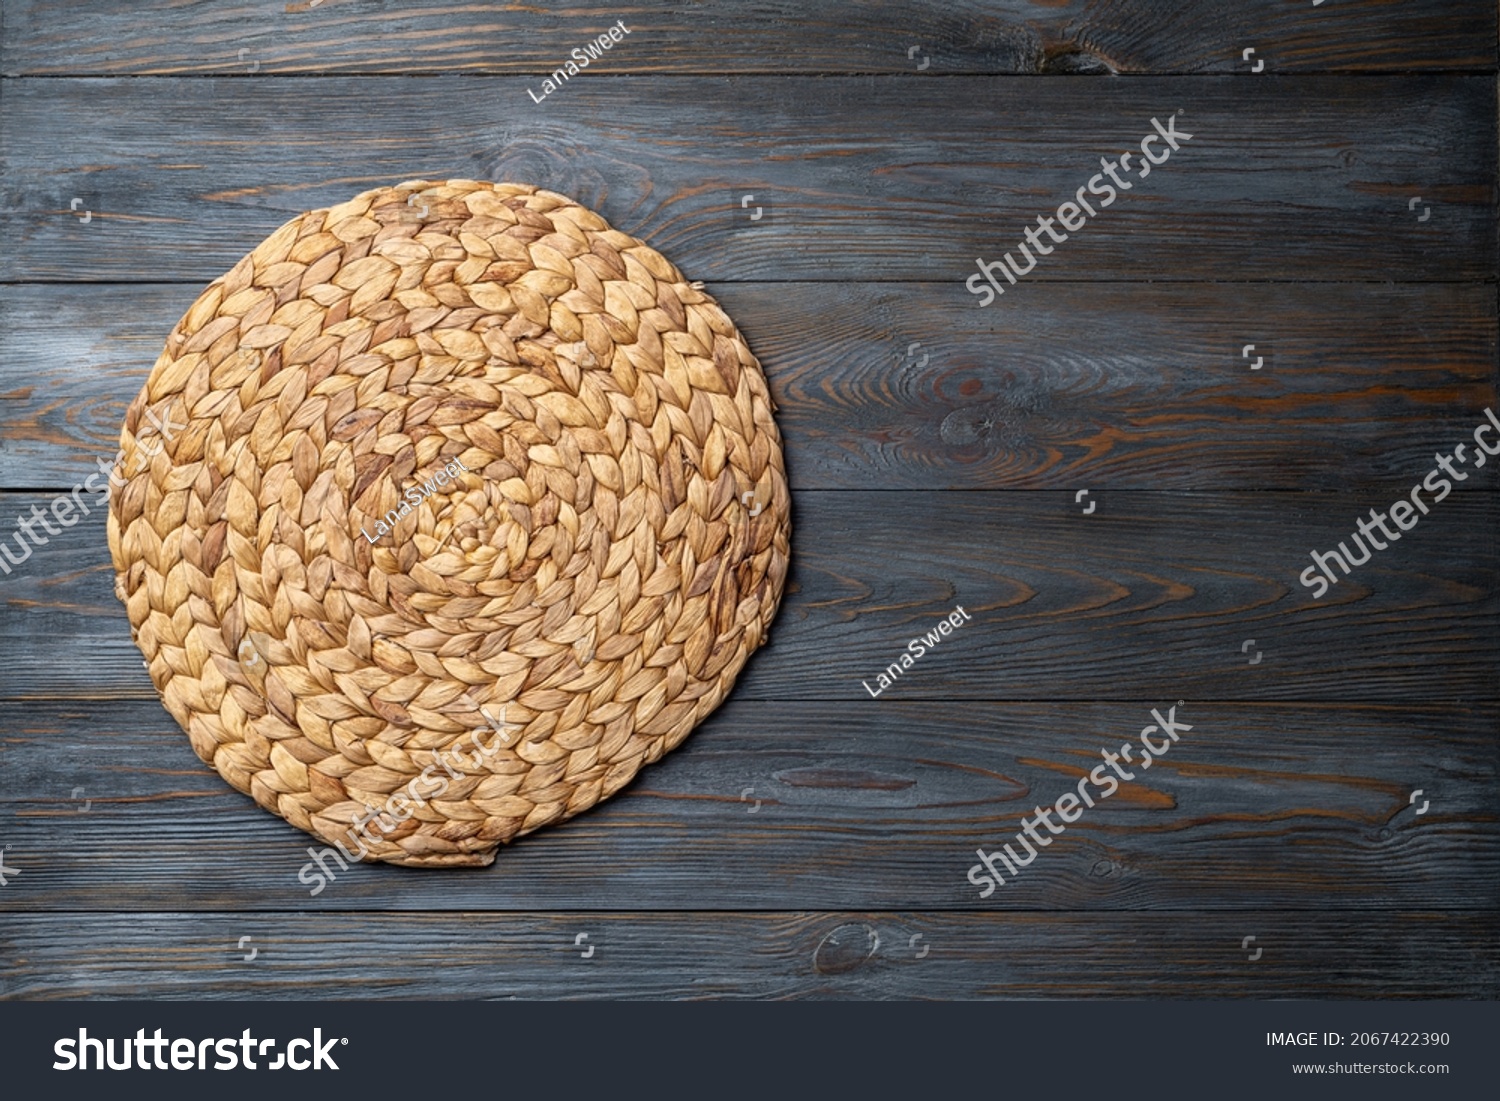 Wicker straw place mat on wooden dark background. Round woven straw mat on wooden gray dining table. Menu, dining, eating concept. Top view, copy space #2067422390